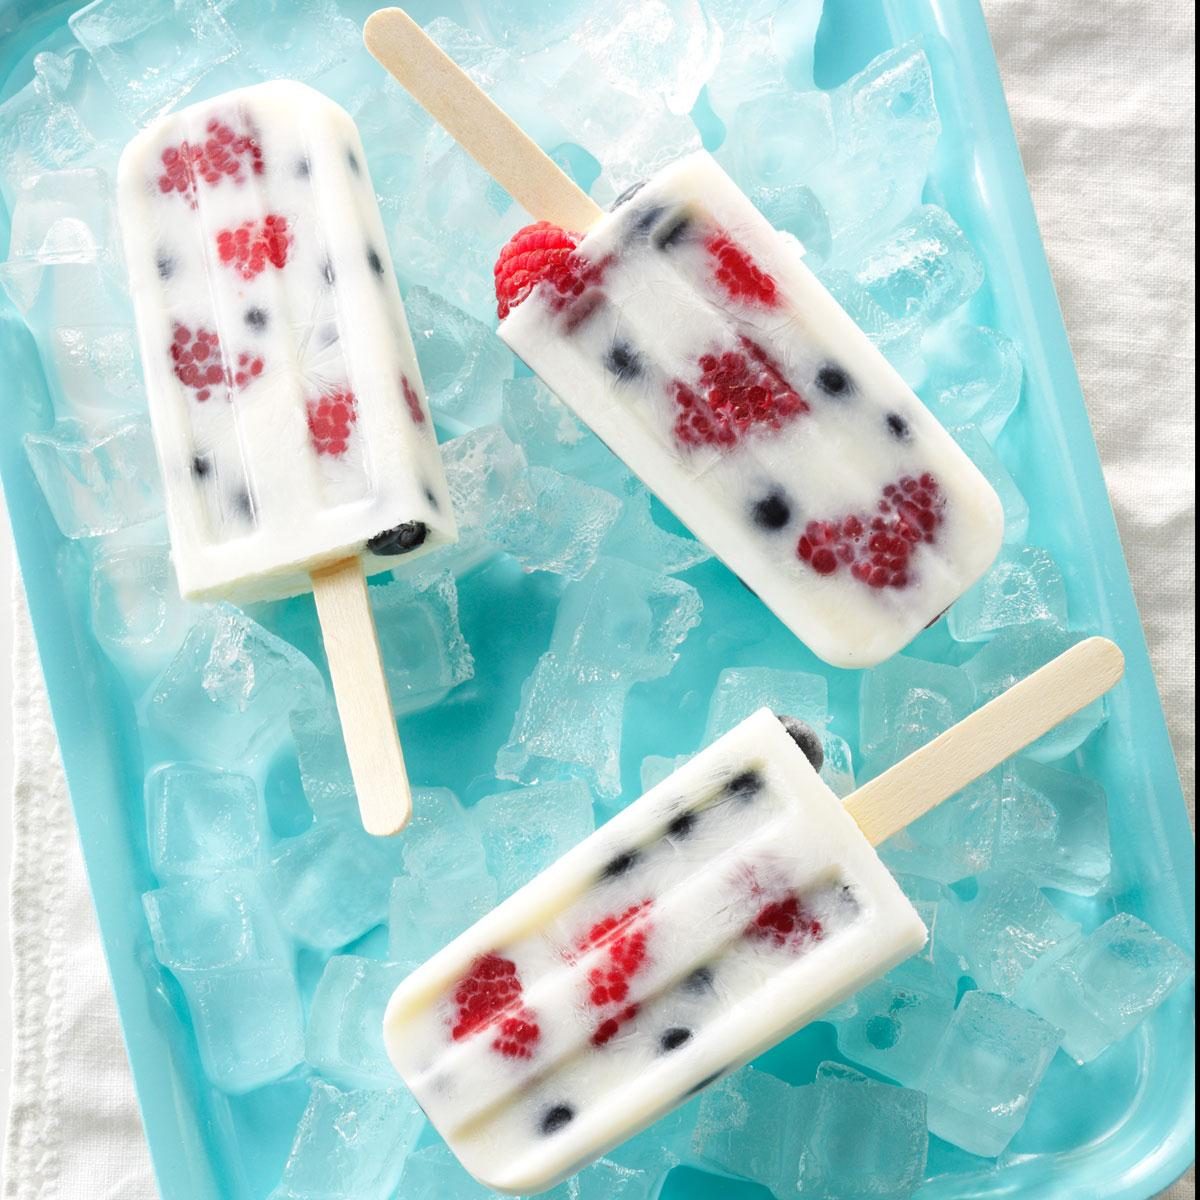 Diy Popsicle Molds · How To Make An Ice Lolly · Recipe by ZanyDays